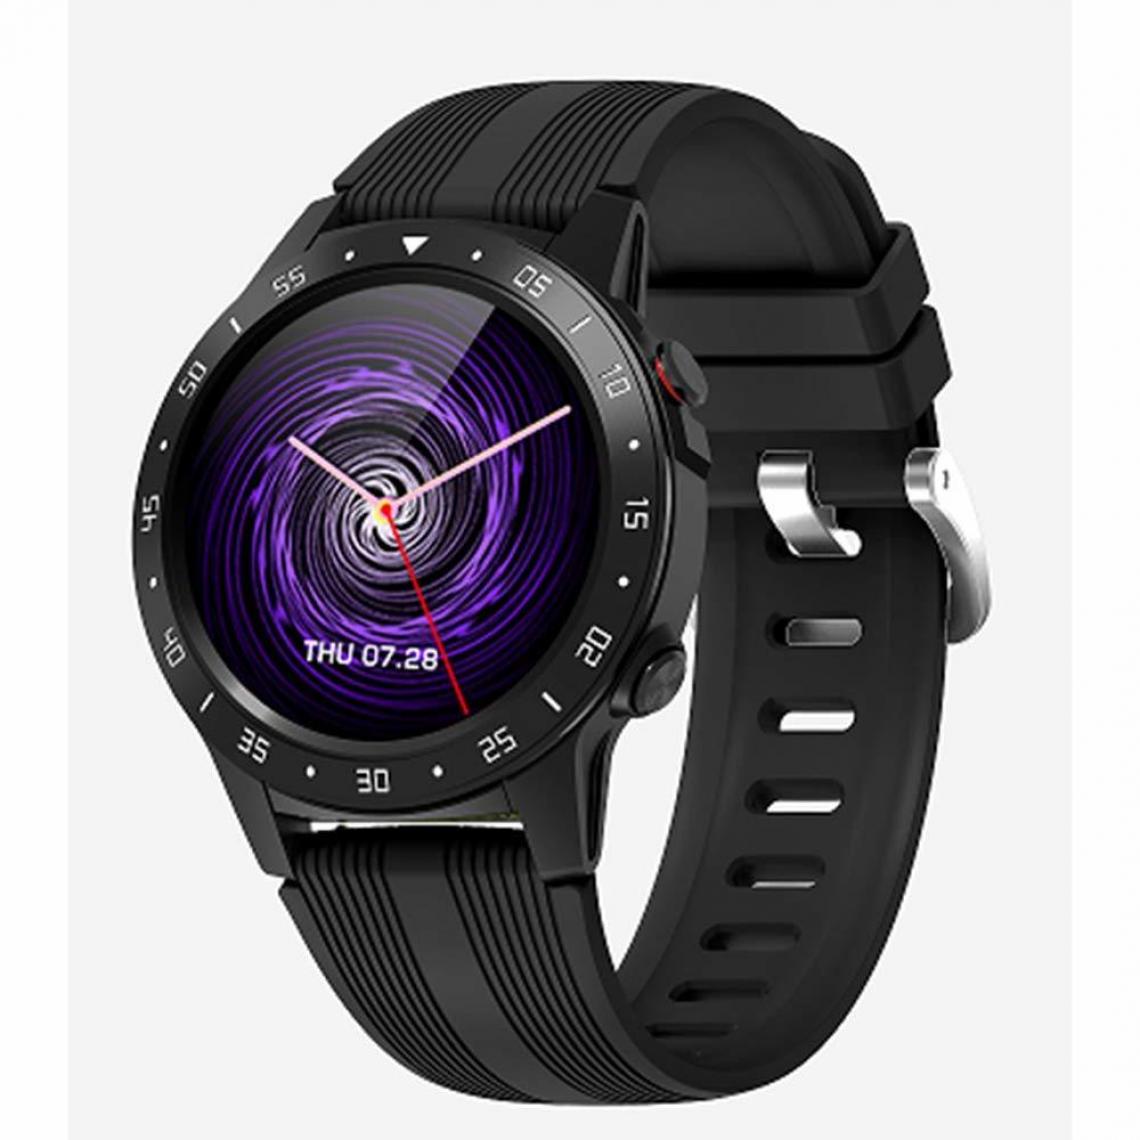 Chronotech Montres - Sport Smart watch Chronus M5S Waterproof Heart Rate Monitor Smart Watch for Android IOS(black) - Montre connectée